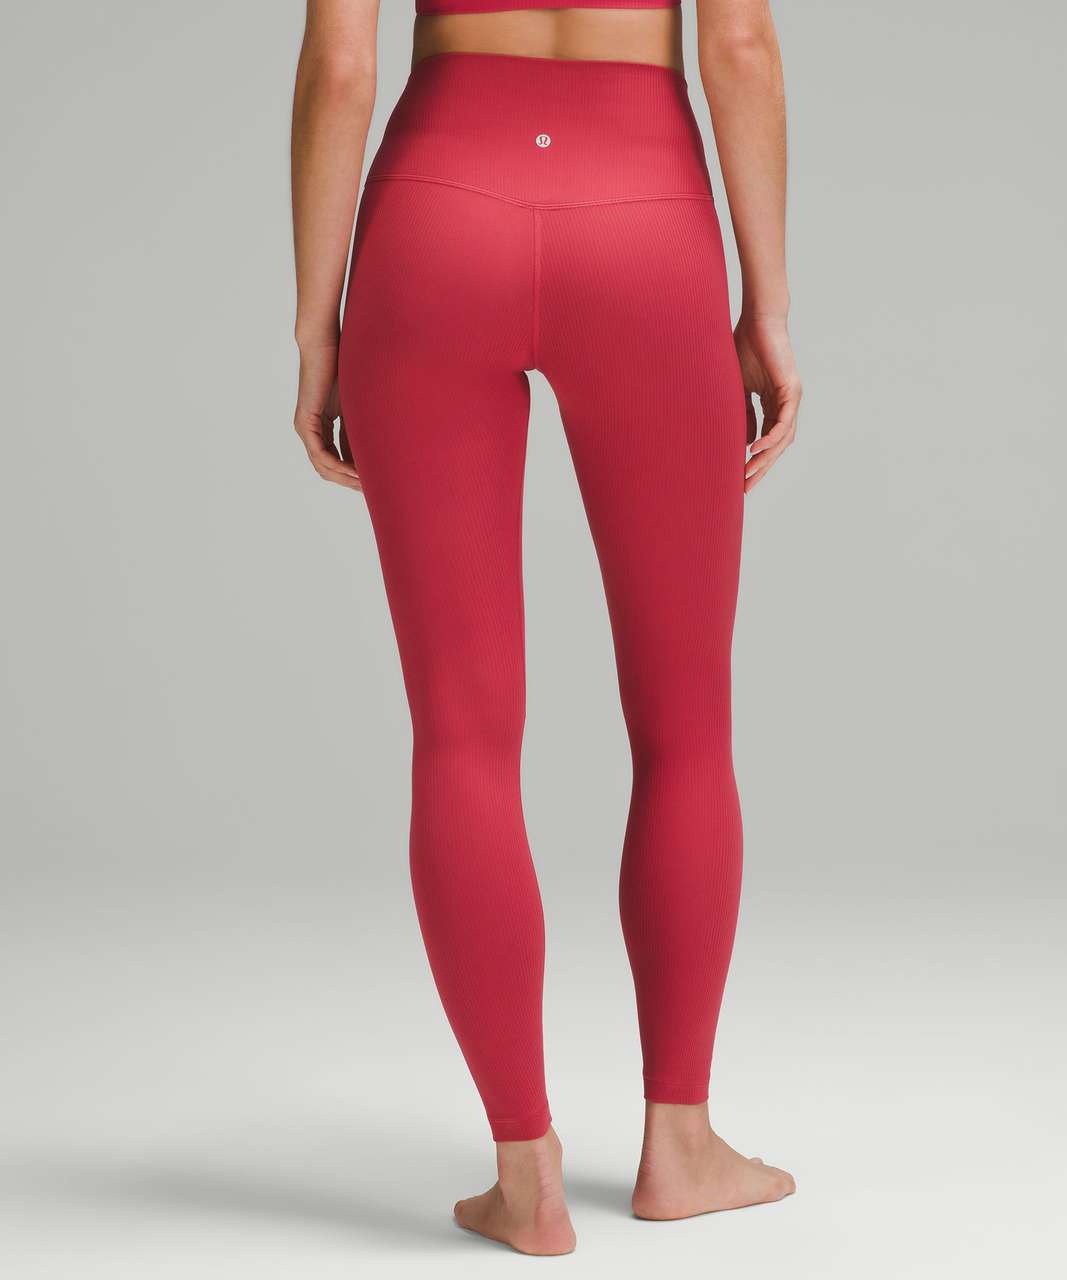 NWT Lululemon Align Pant Size 2 Pink Lychee 28 Double Lined Sold